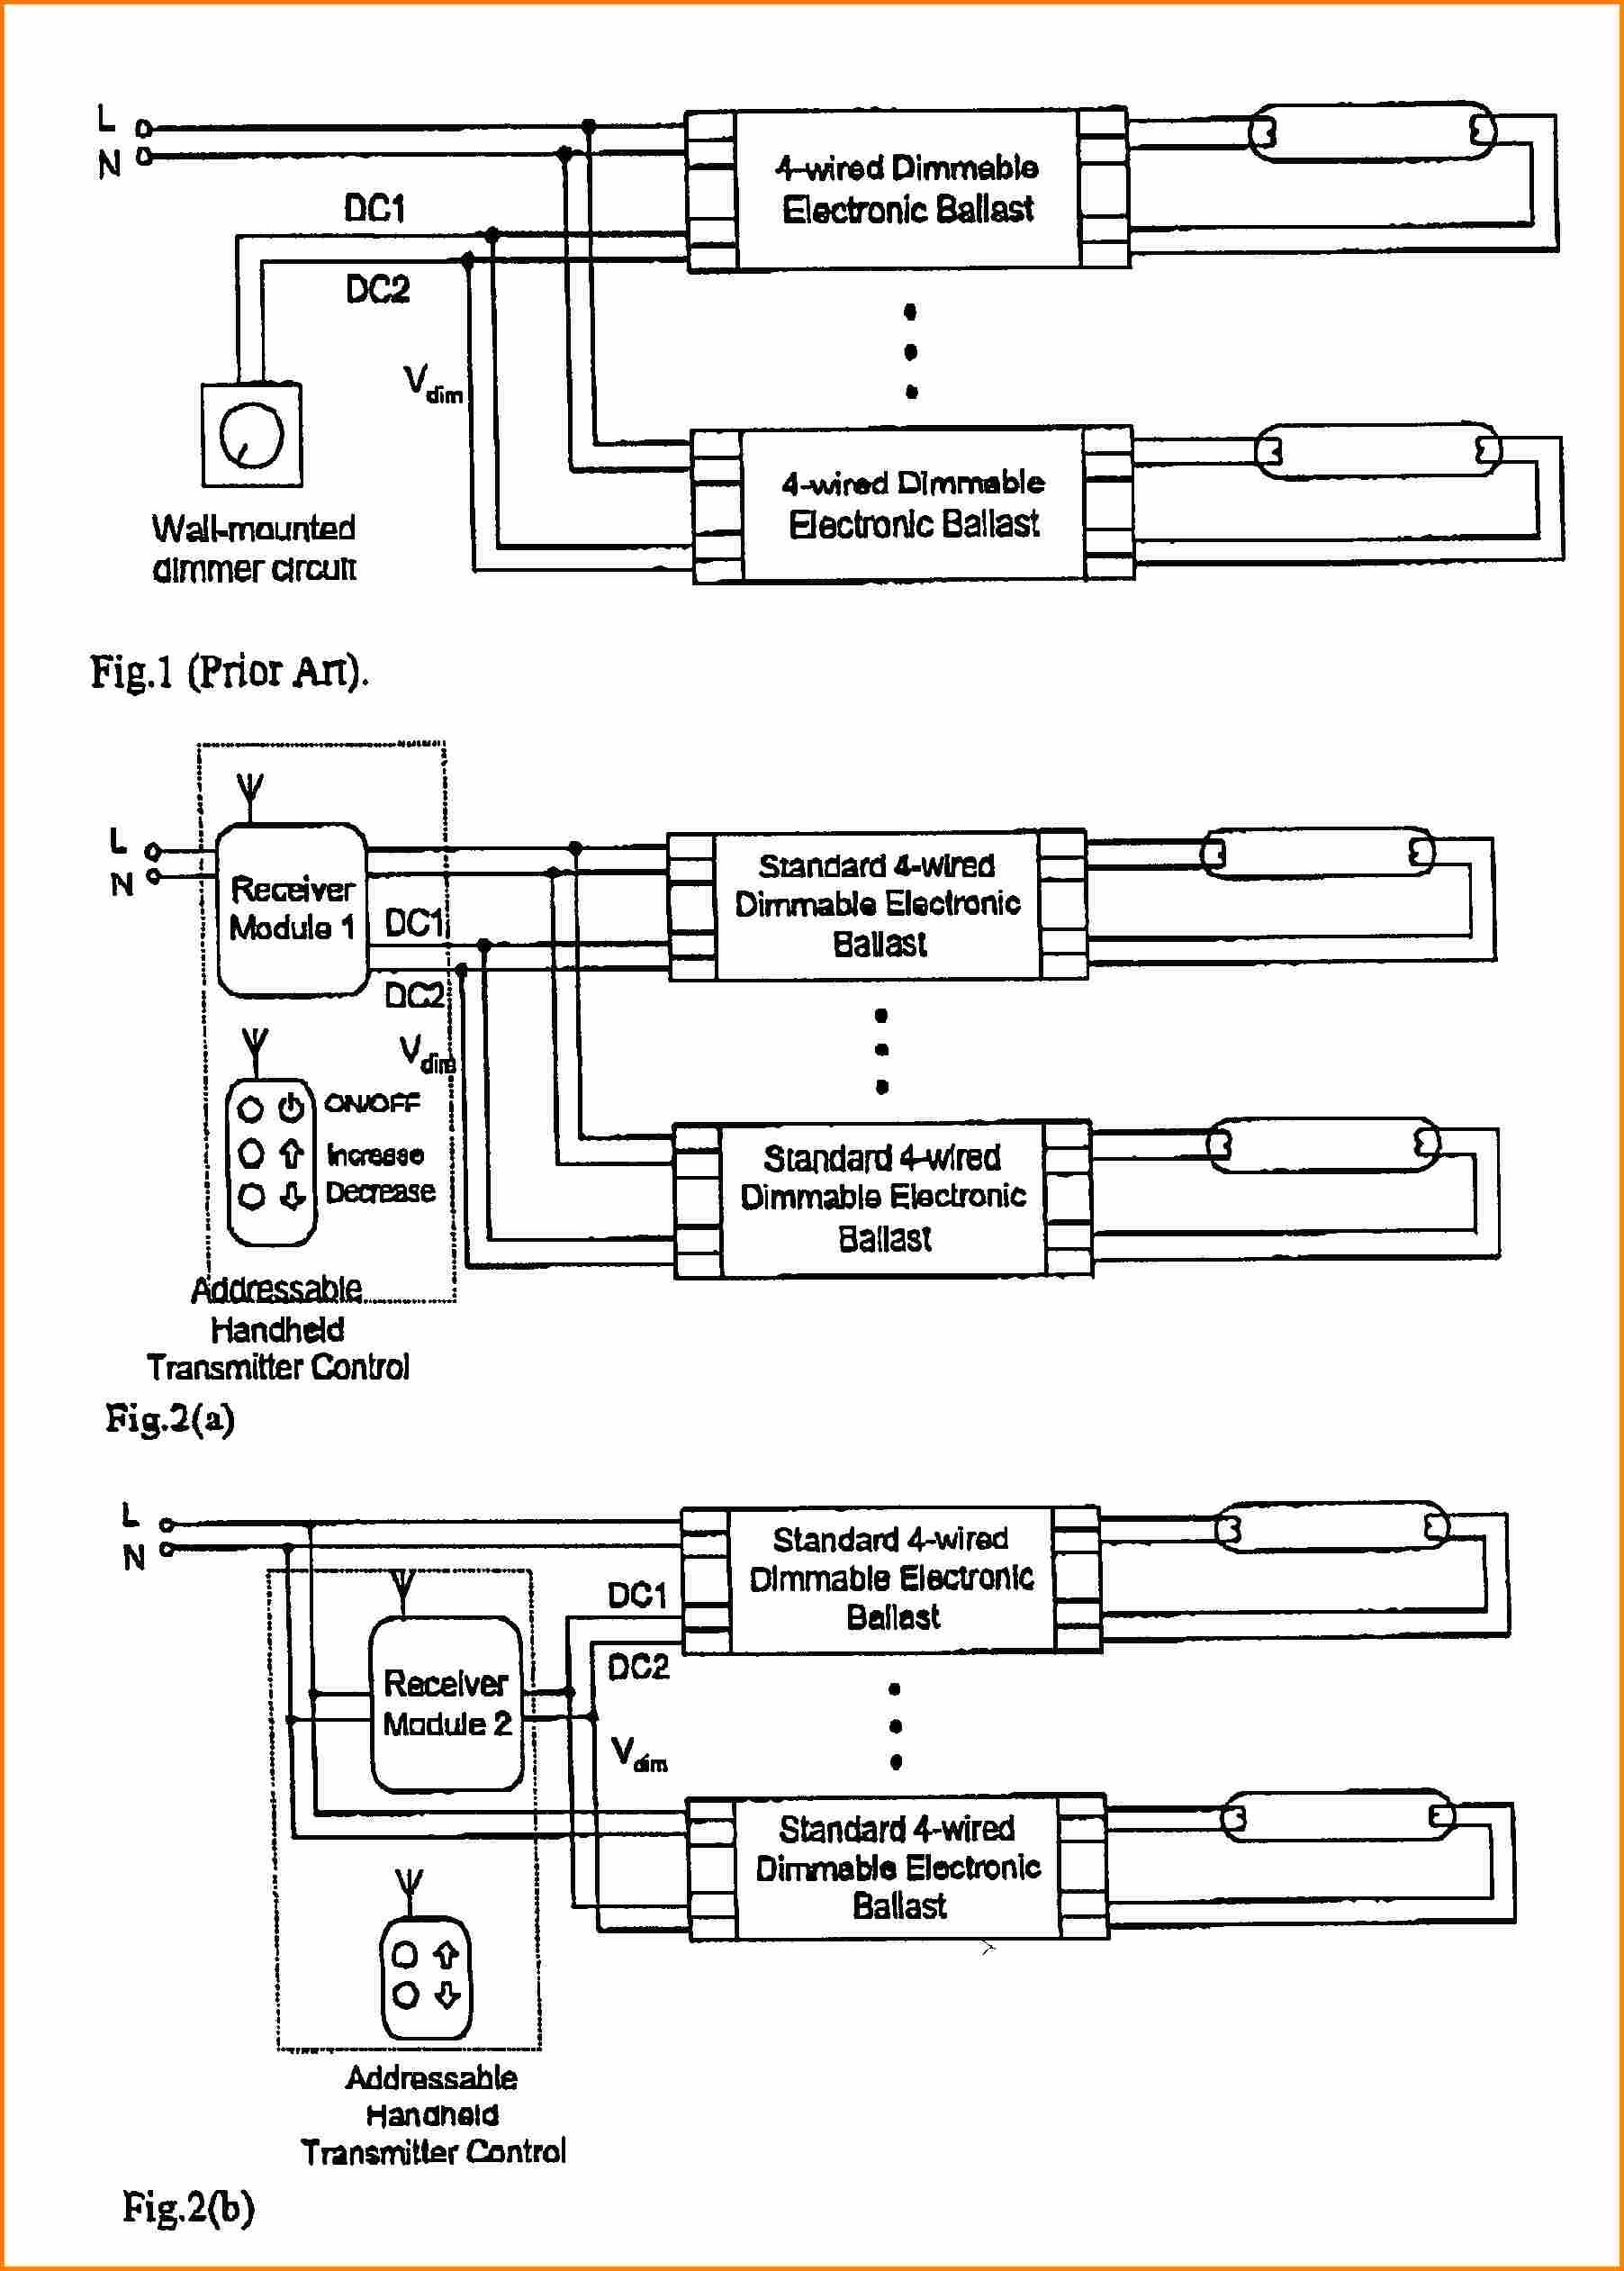 Led T8 Replacement Wiring Diagram Free Download | Wiring Diagram - Led Fluorescent Tube Replacement Wiring Diagram